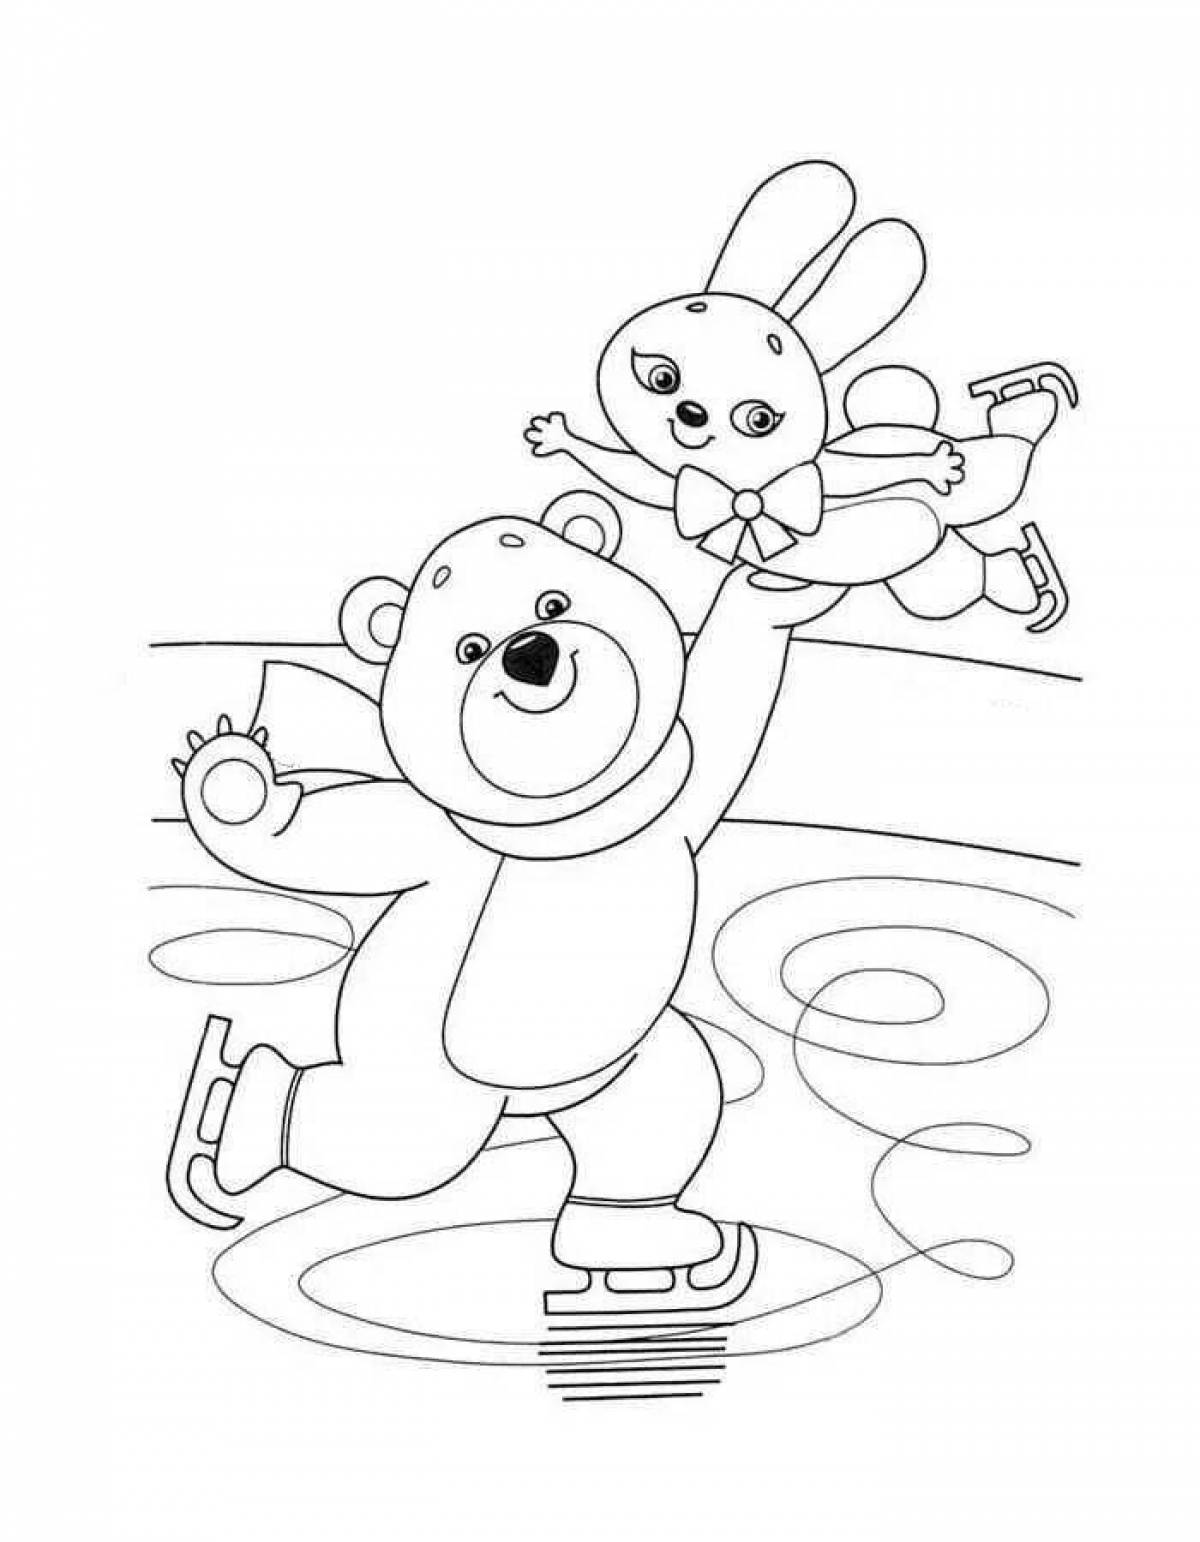 Outstanding winter sports coloring book for toddlers